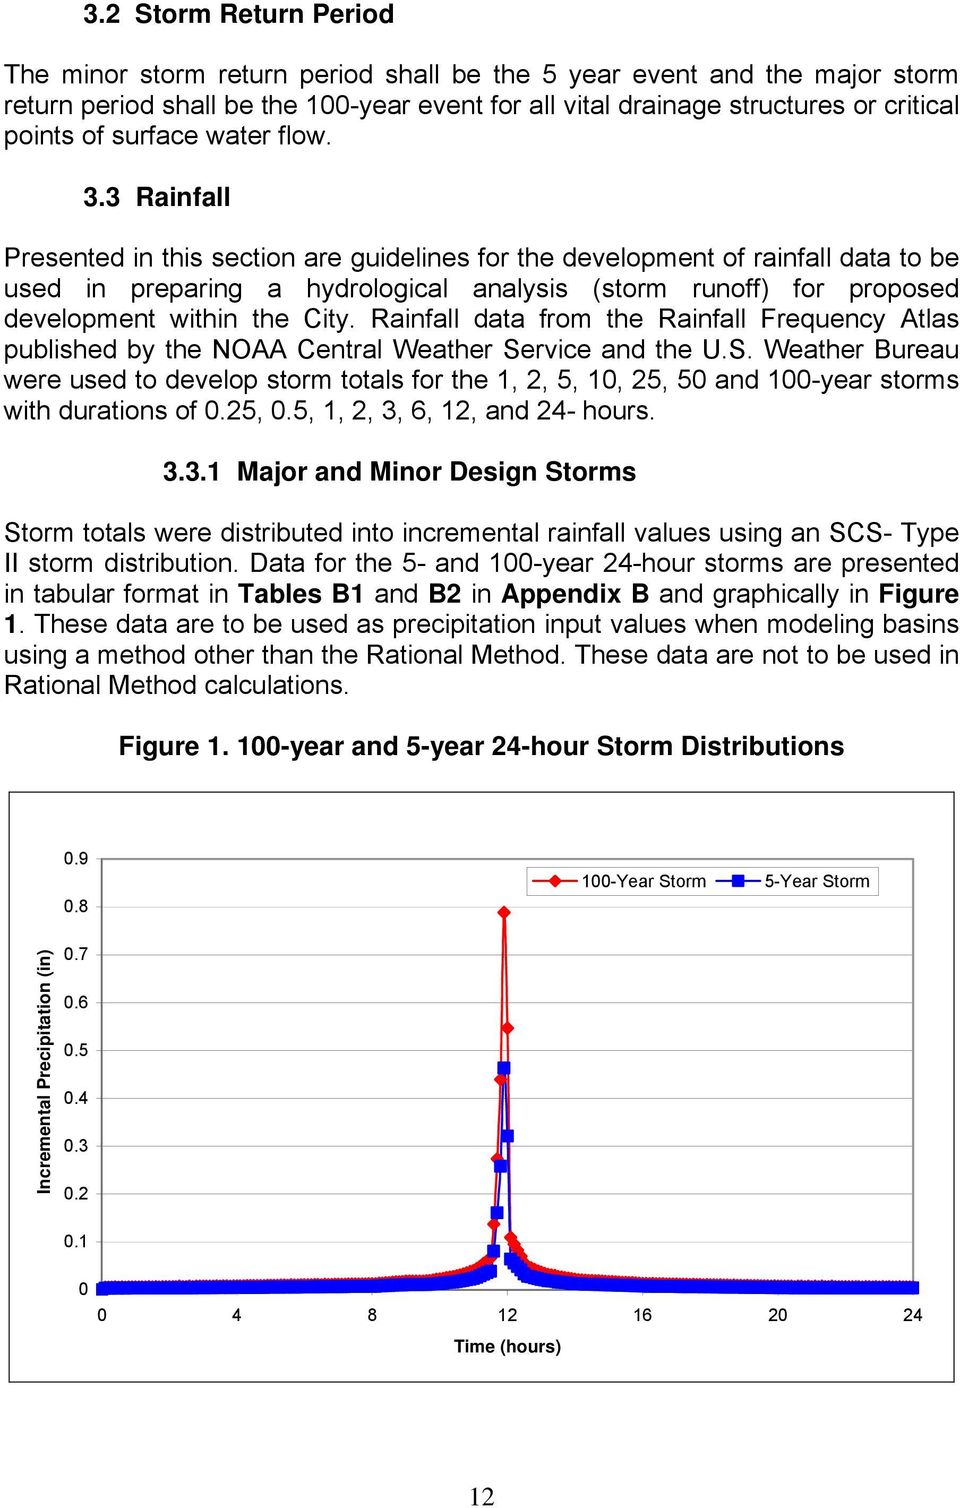 3 Rainfall Presented in this section are guidelines for the development of rainfall data to be used in preparing a hydrological analysis (storm runoff) for proposed development within the City.